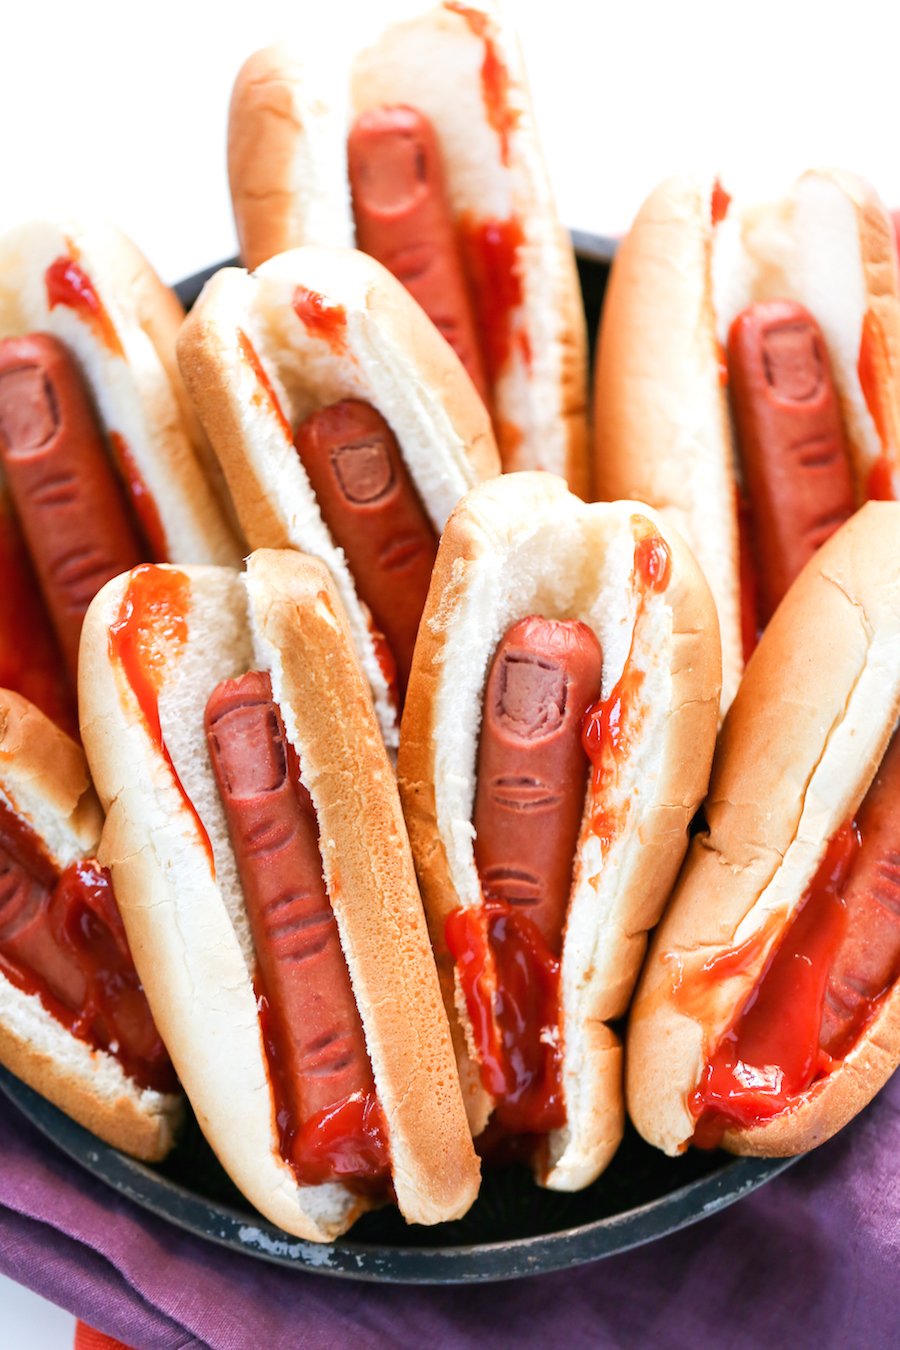 recipe perfect bloody severed fingers hot dogs with ketchup halloween